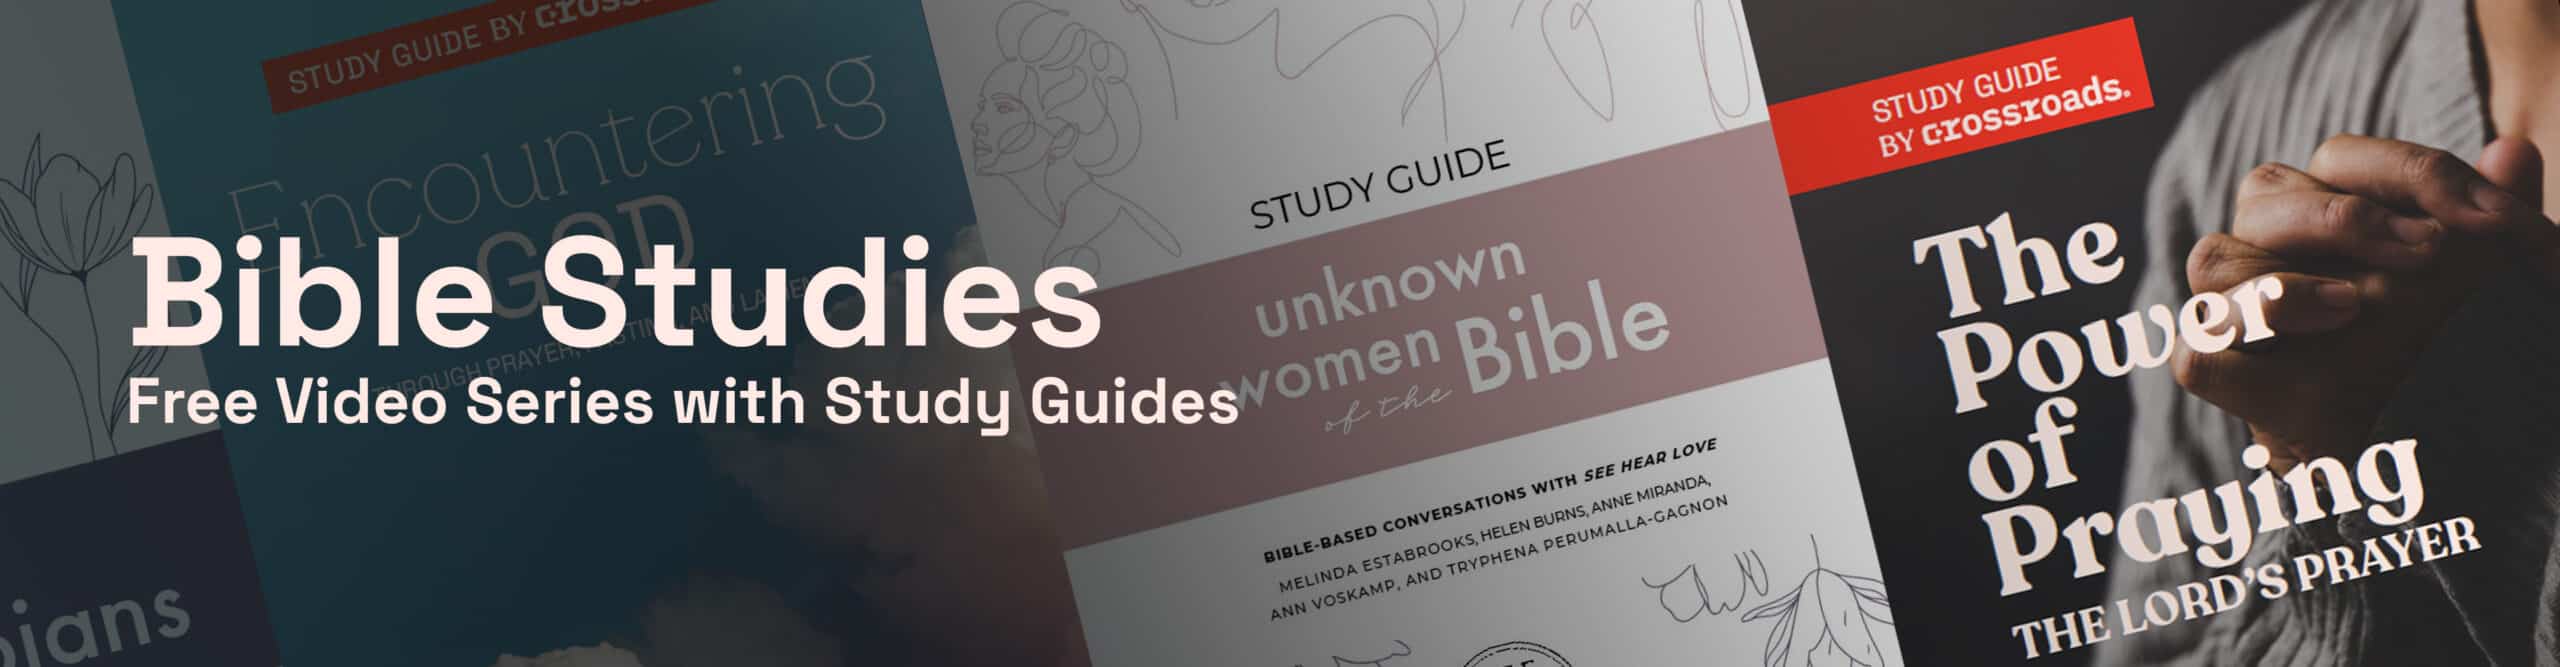 main-bible-study-page-banner-3840x1000